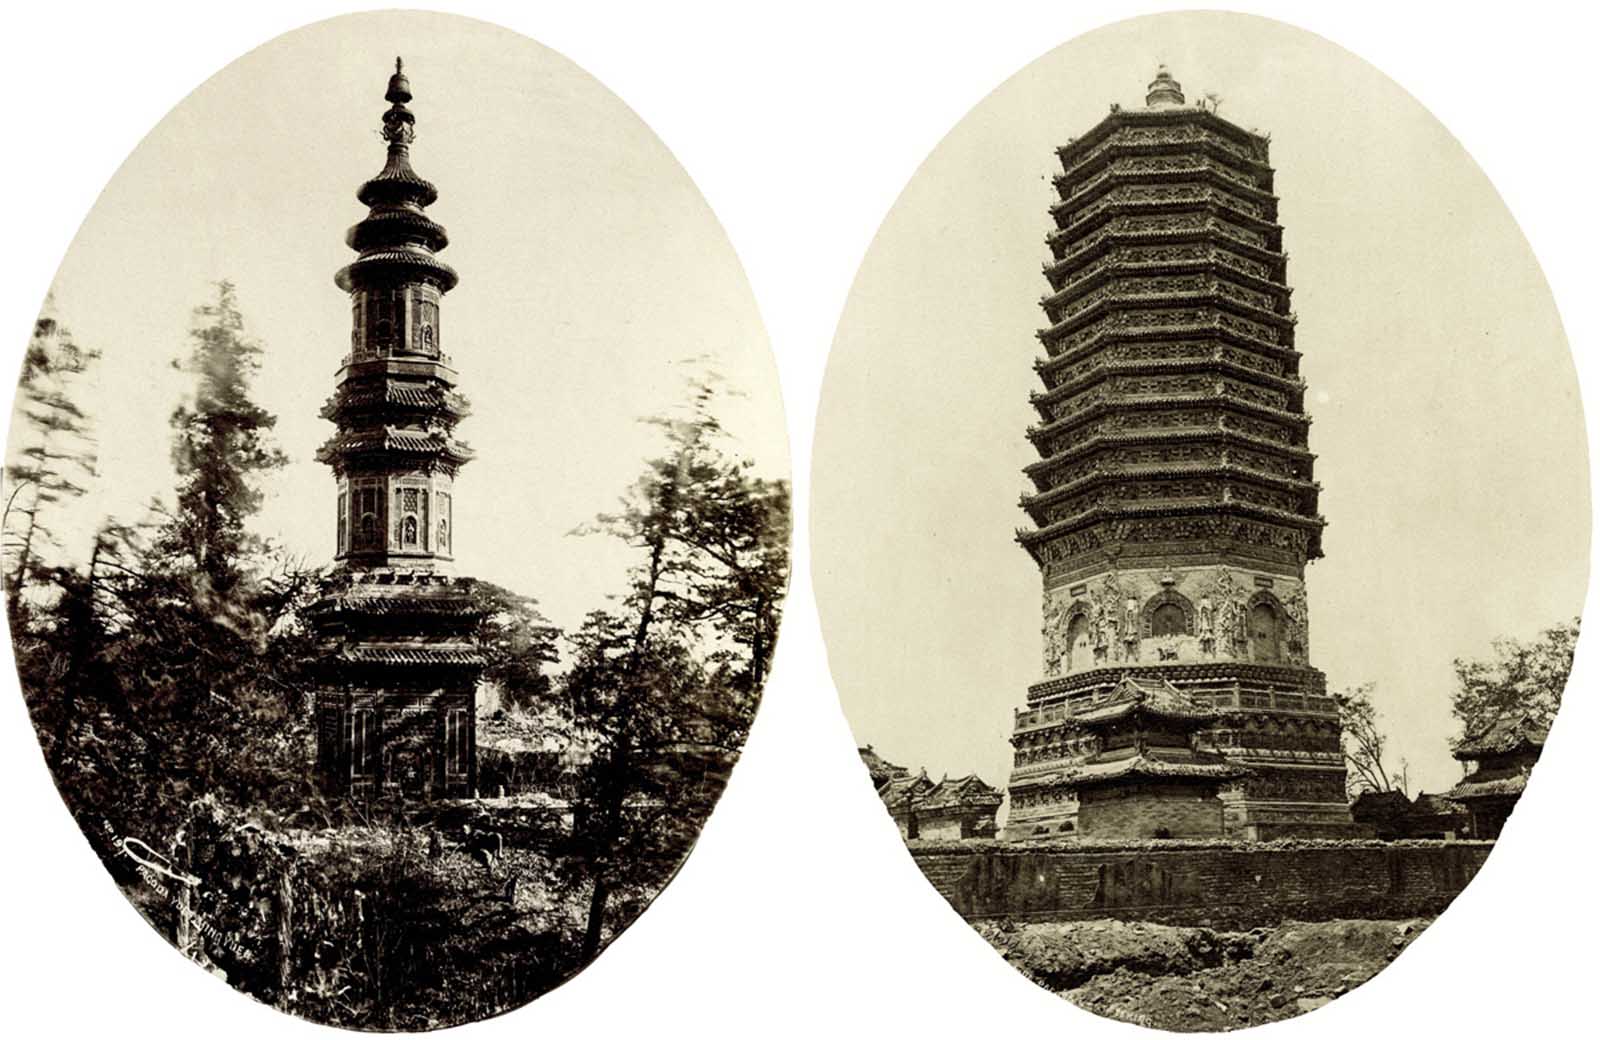 Left: A view of the Fragrant Hills Pagoda, which was part of the Grand Zongjing Monastery. The pagoda is embellished with glazed tiles of yellow, green, purple, and blue. Right: The 12th century pagoda of Tianning Temple, standing a few miles from the west gate of the city. It is one of the oldest buildings in the capital. Like many other Liao dynasty pagodas, the structure is solid. A sealed underground chamber holds Buddhist relics, statues, and sutras placed when the pagoda was built. 